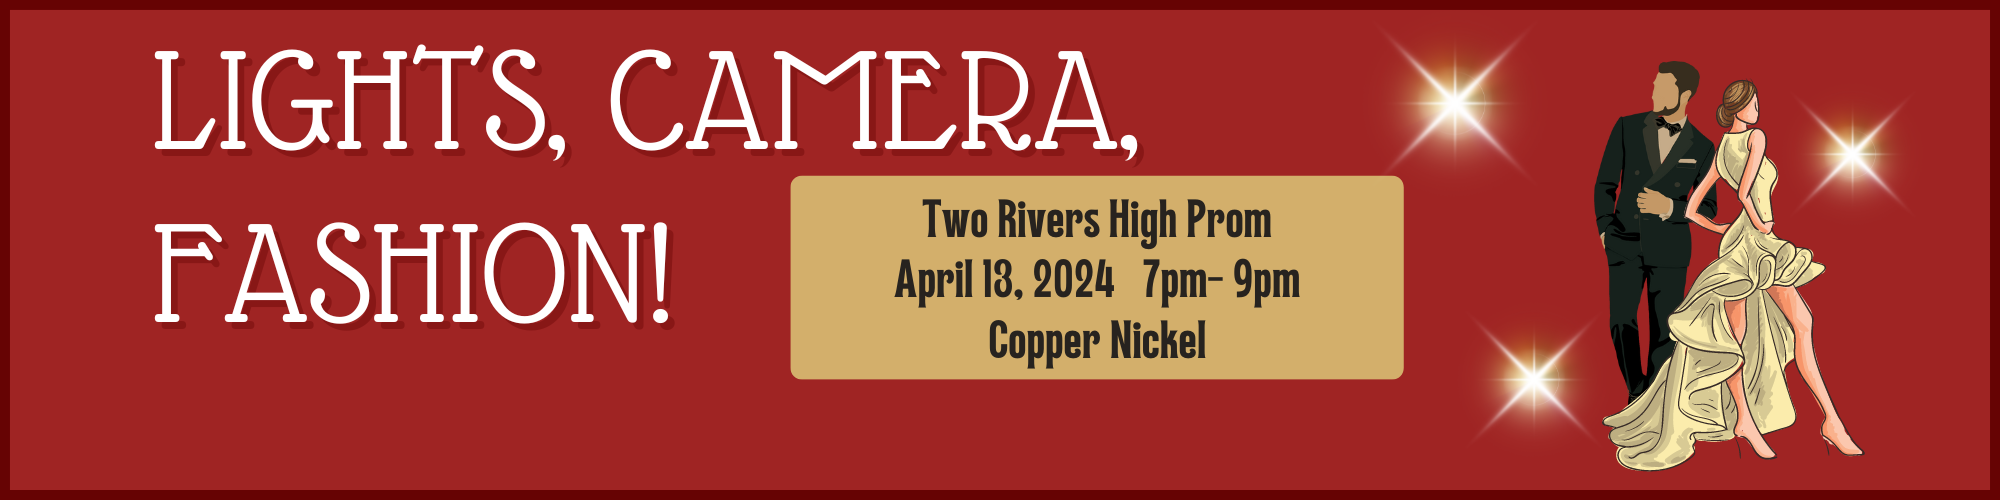 Illustration of Dancers, Lights, Camera, Fashion Two Rivers High Prom, April 13, 2024 at the Copper Nickel